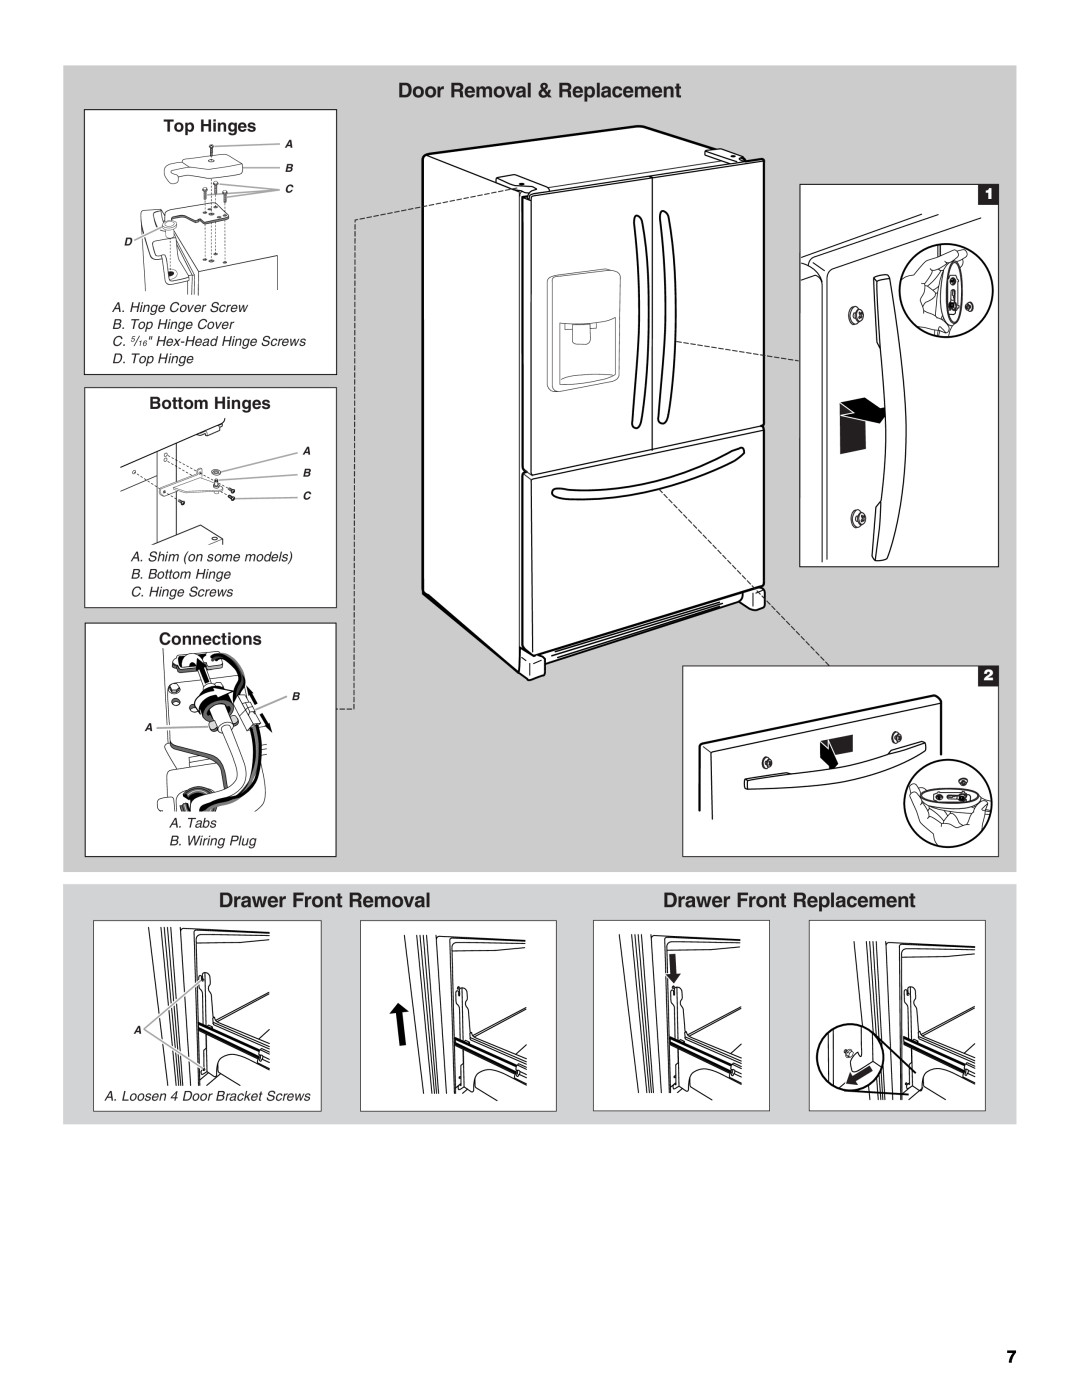 Whirlpool 12828185A Door Removal & Replacement, Drawer Front Removal, Drawer Front Replacement, Top Hinges, Bottom Hinges 